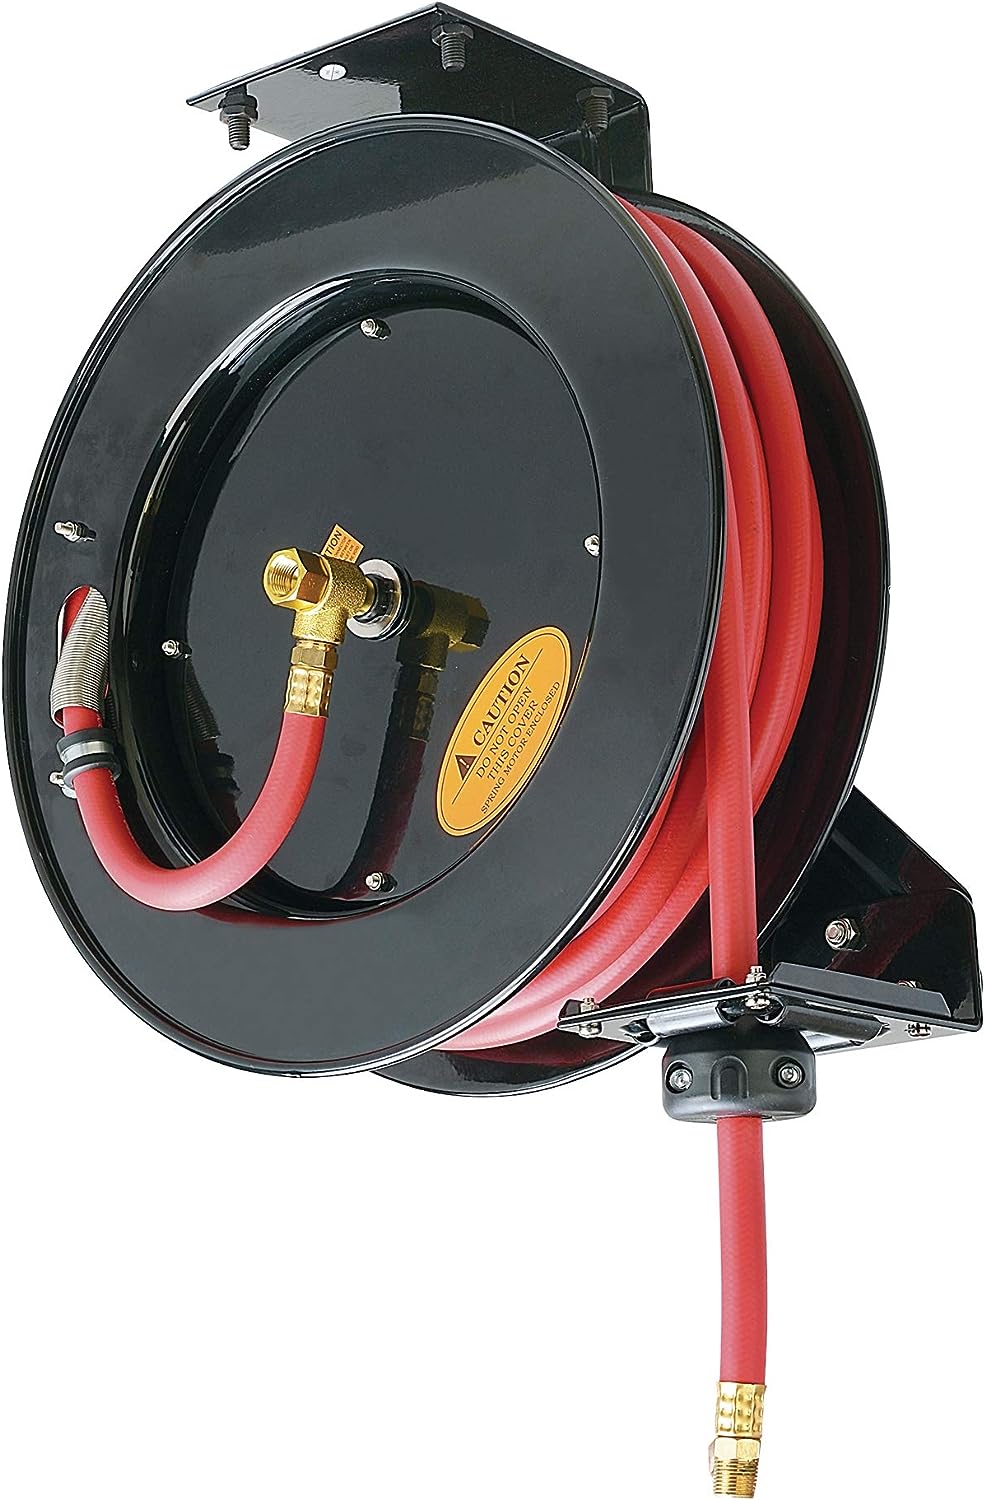 UMI Hose Reel Retractable 7.5m/25' Feet x 3/8"Inch Connection